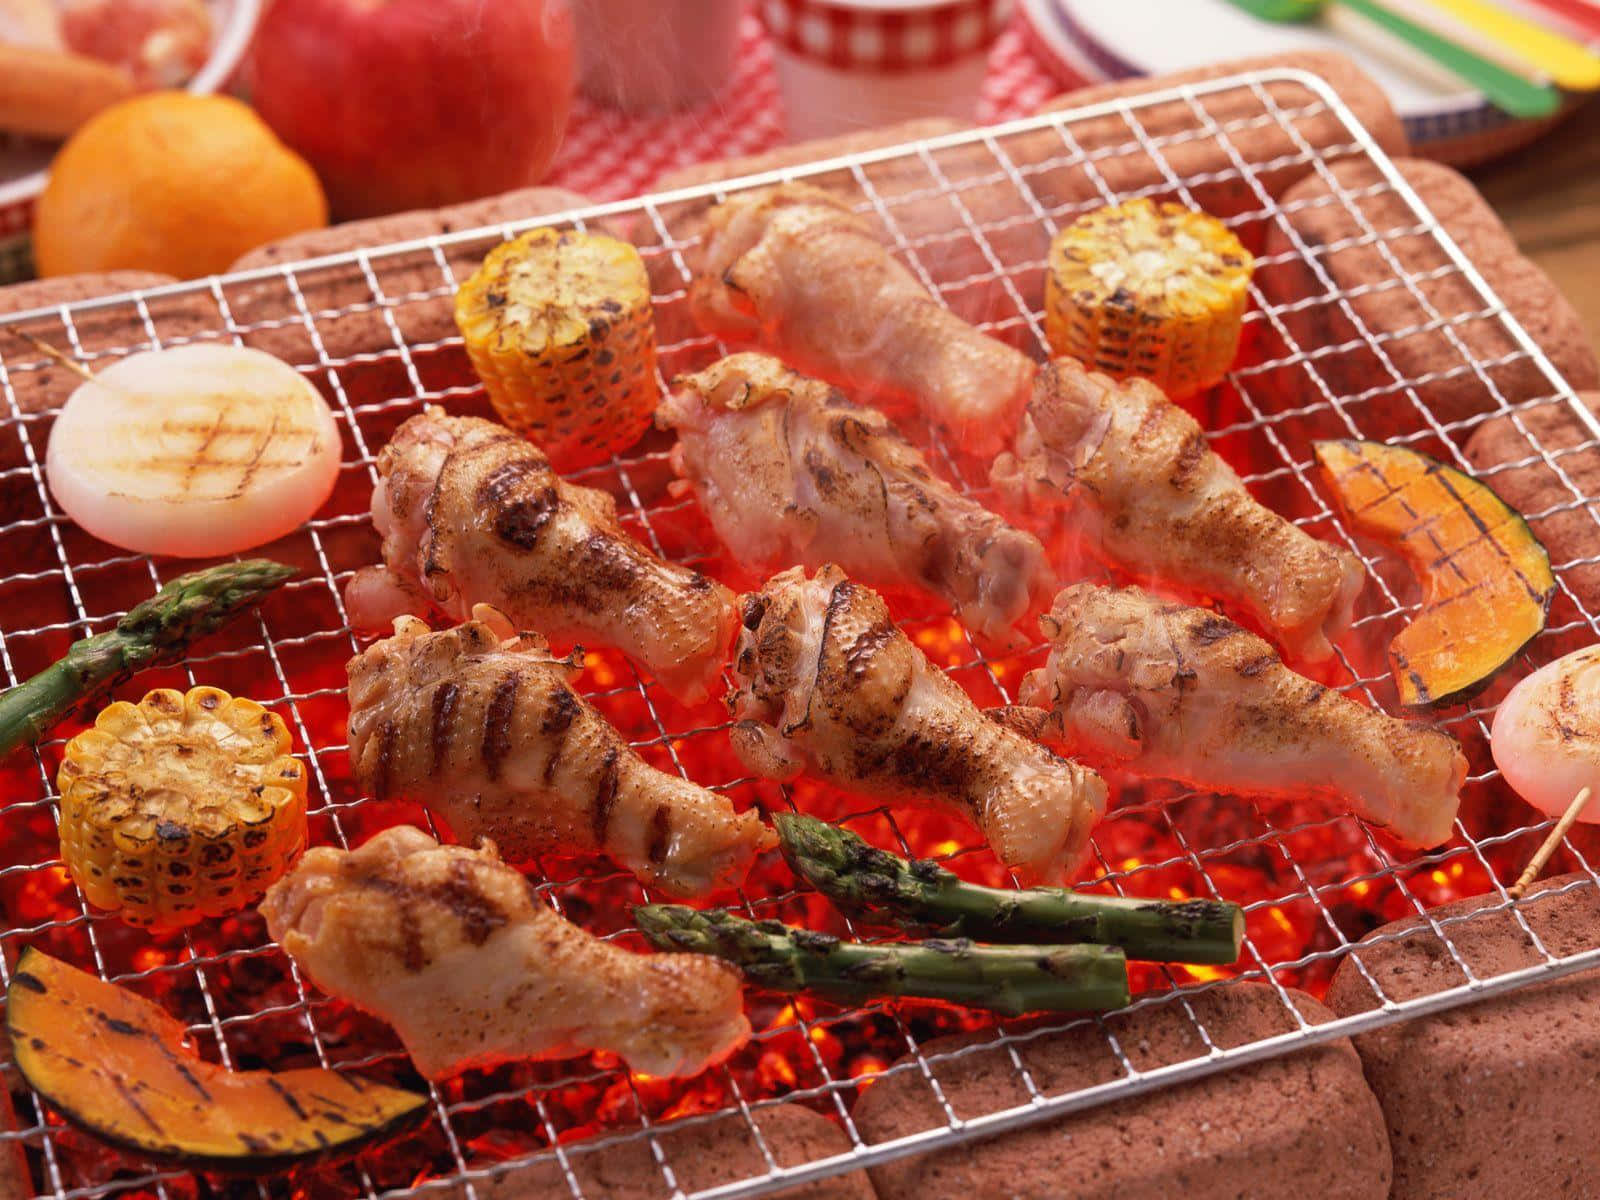 A Grill With Chicken And Vegetables On It